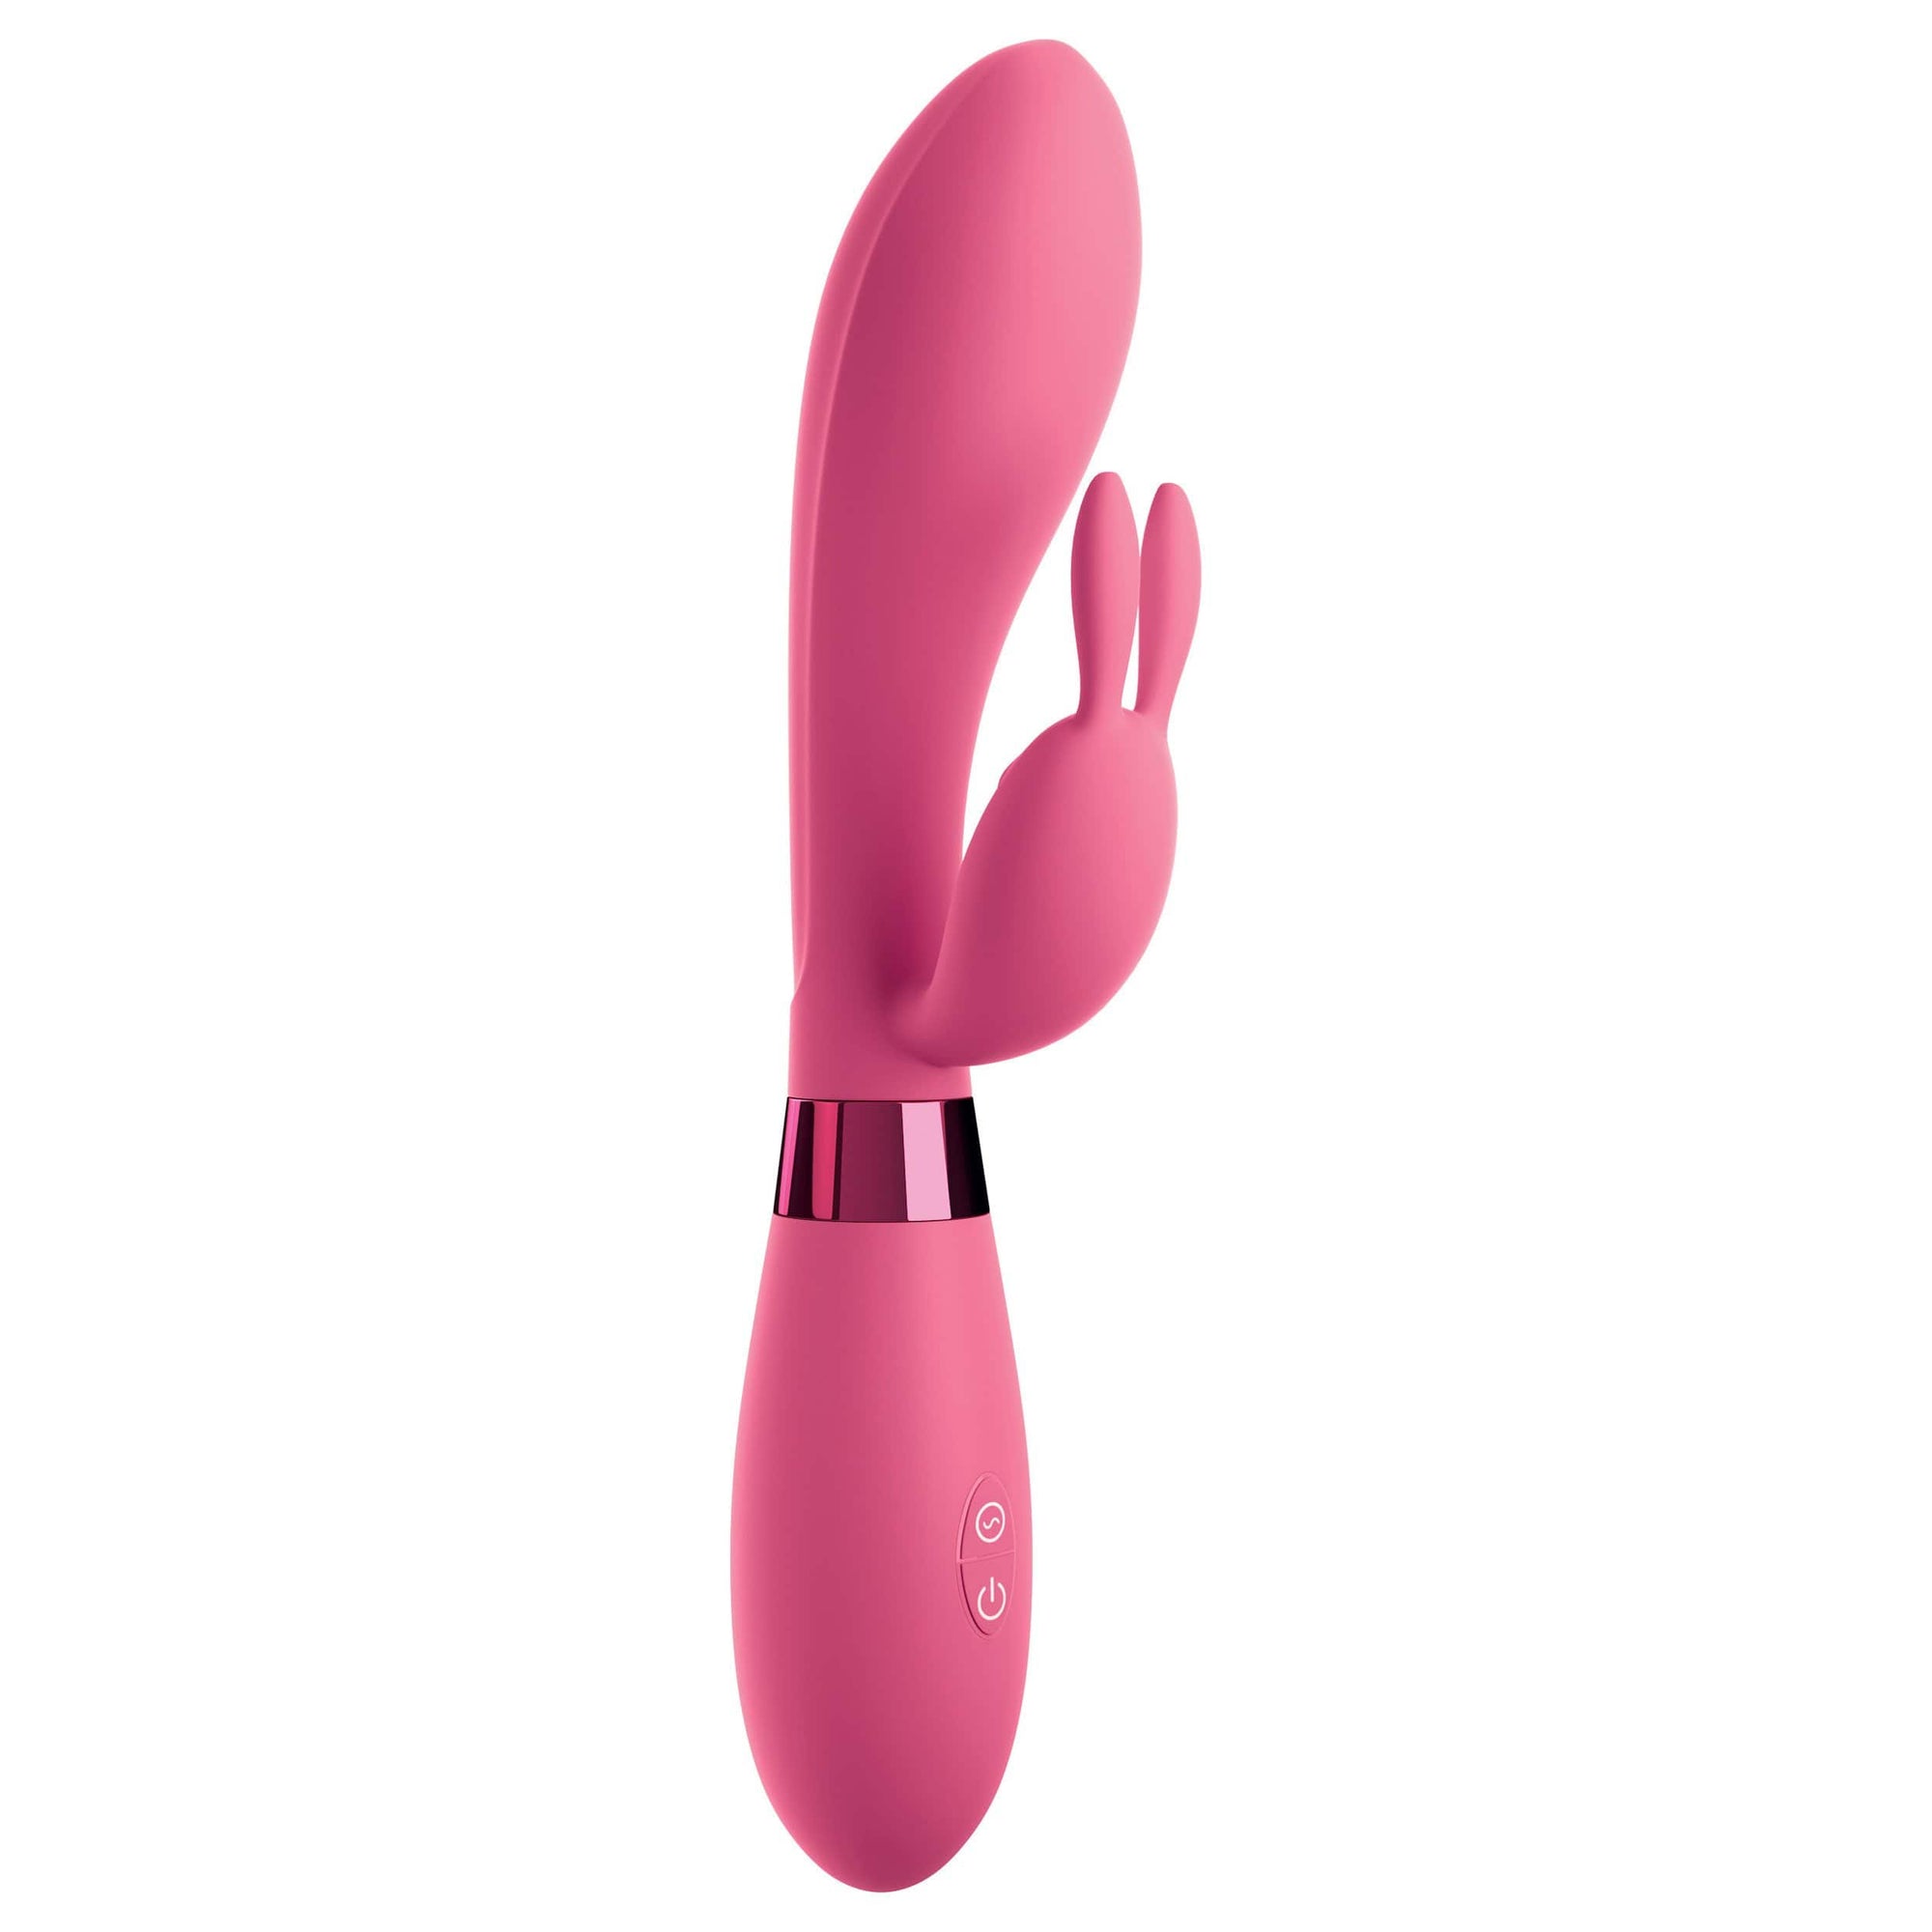 Pipedream - OMG Rabbits #Selfie Silicone Vibrator (Pink) -  Rabbit Dildo (Vibration) Rechargeable  Durio.sg